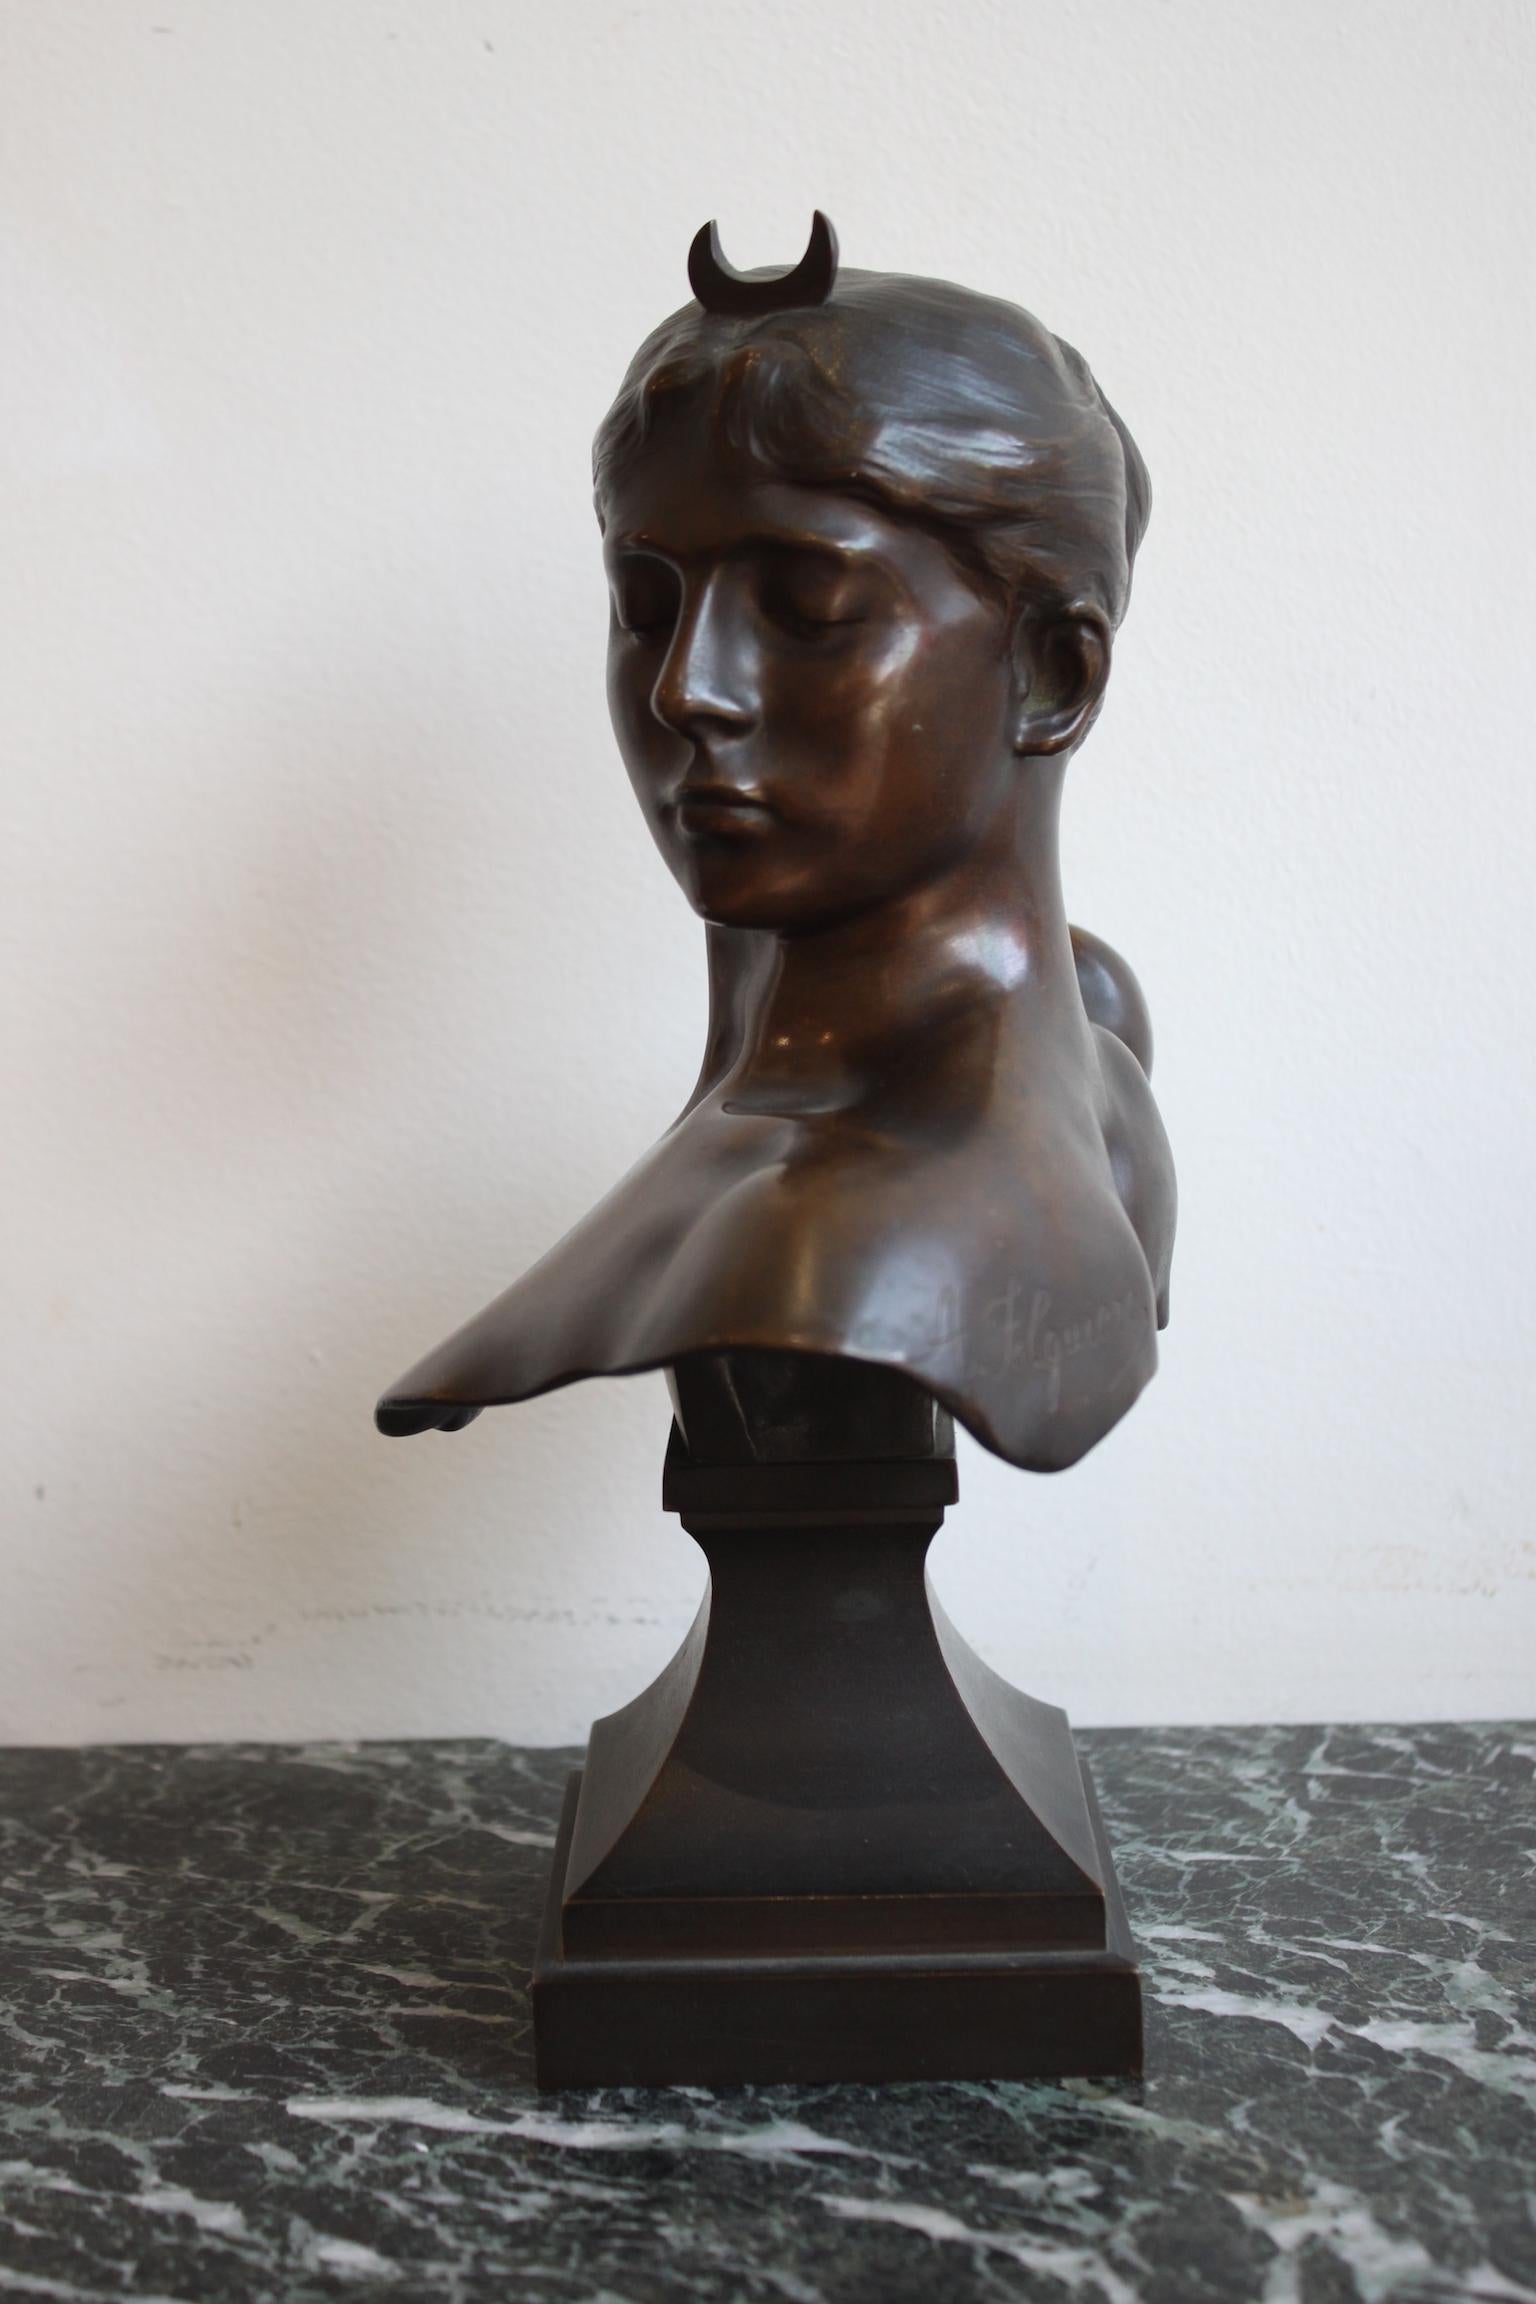 19th century bronze sculpture representing the bust of Diane the Huntress, by French sculptor Alexandre Falguière.
The same model is exposed in the Musée d 'Orsay, Paris.
In a perfect state. Signed
Dimensions: Width 15 cm, height 26 cm, depth 10